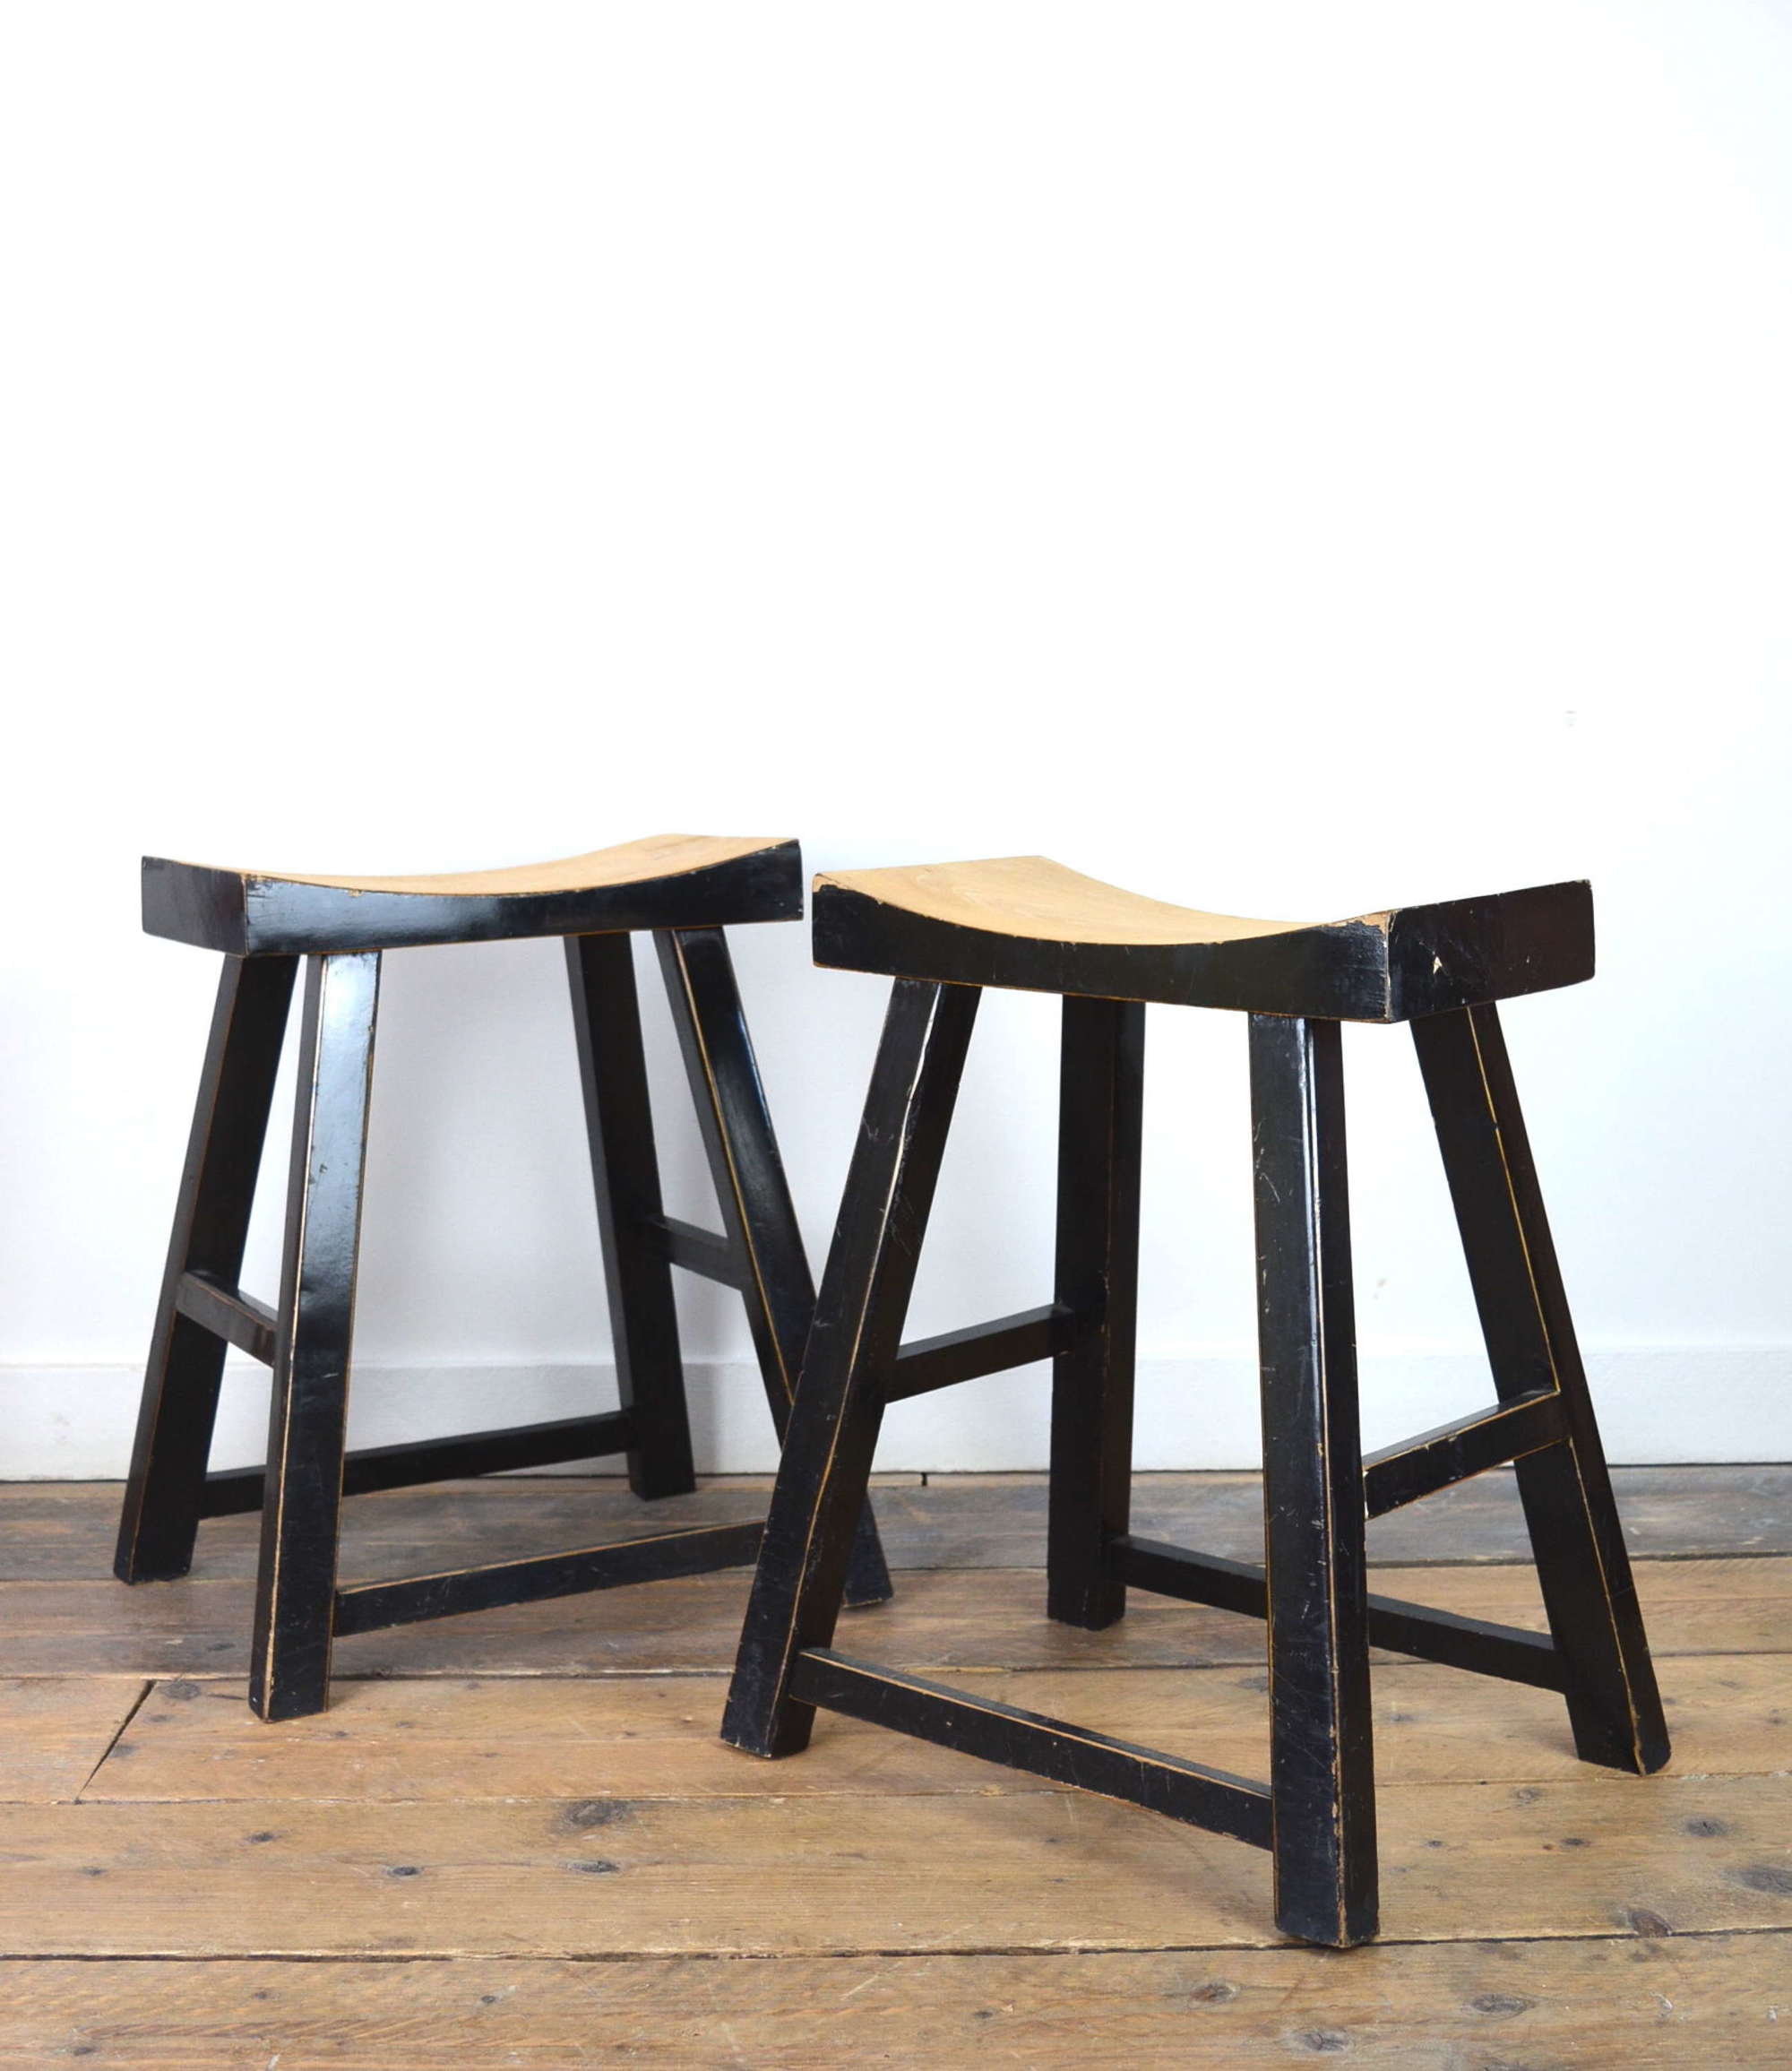 PAIR OF MID 20TH CENTURY BRUTALIST FRENCH STOOLS